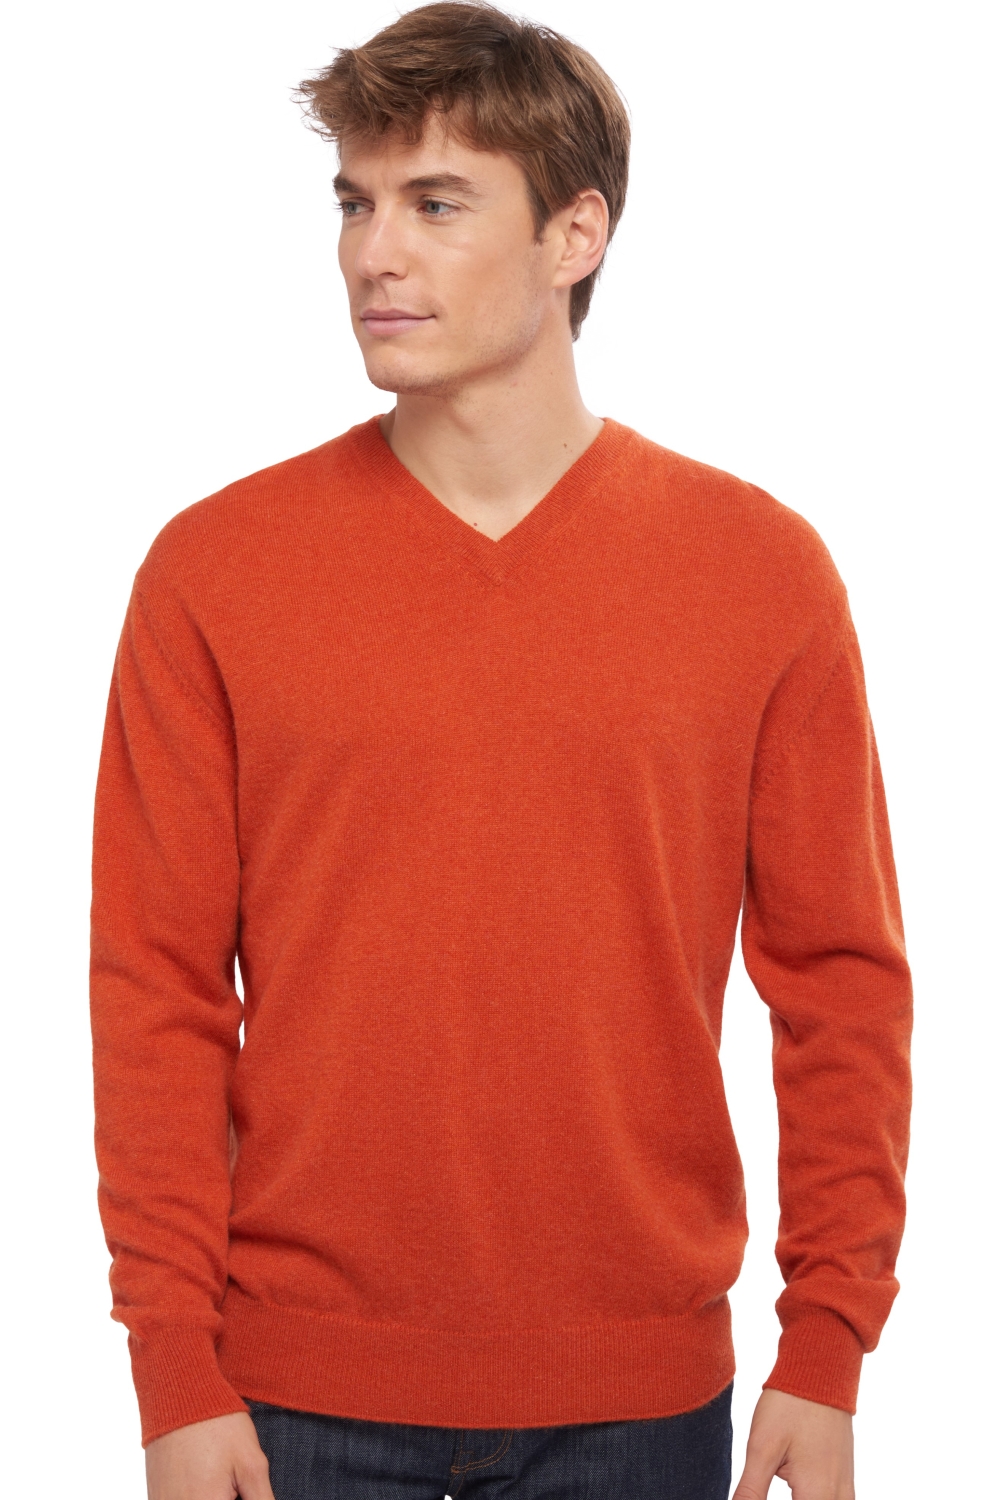 Cachemire pull homme col v gaspard paprika xs